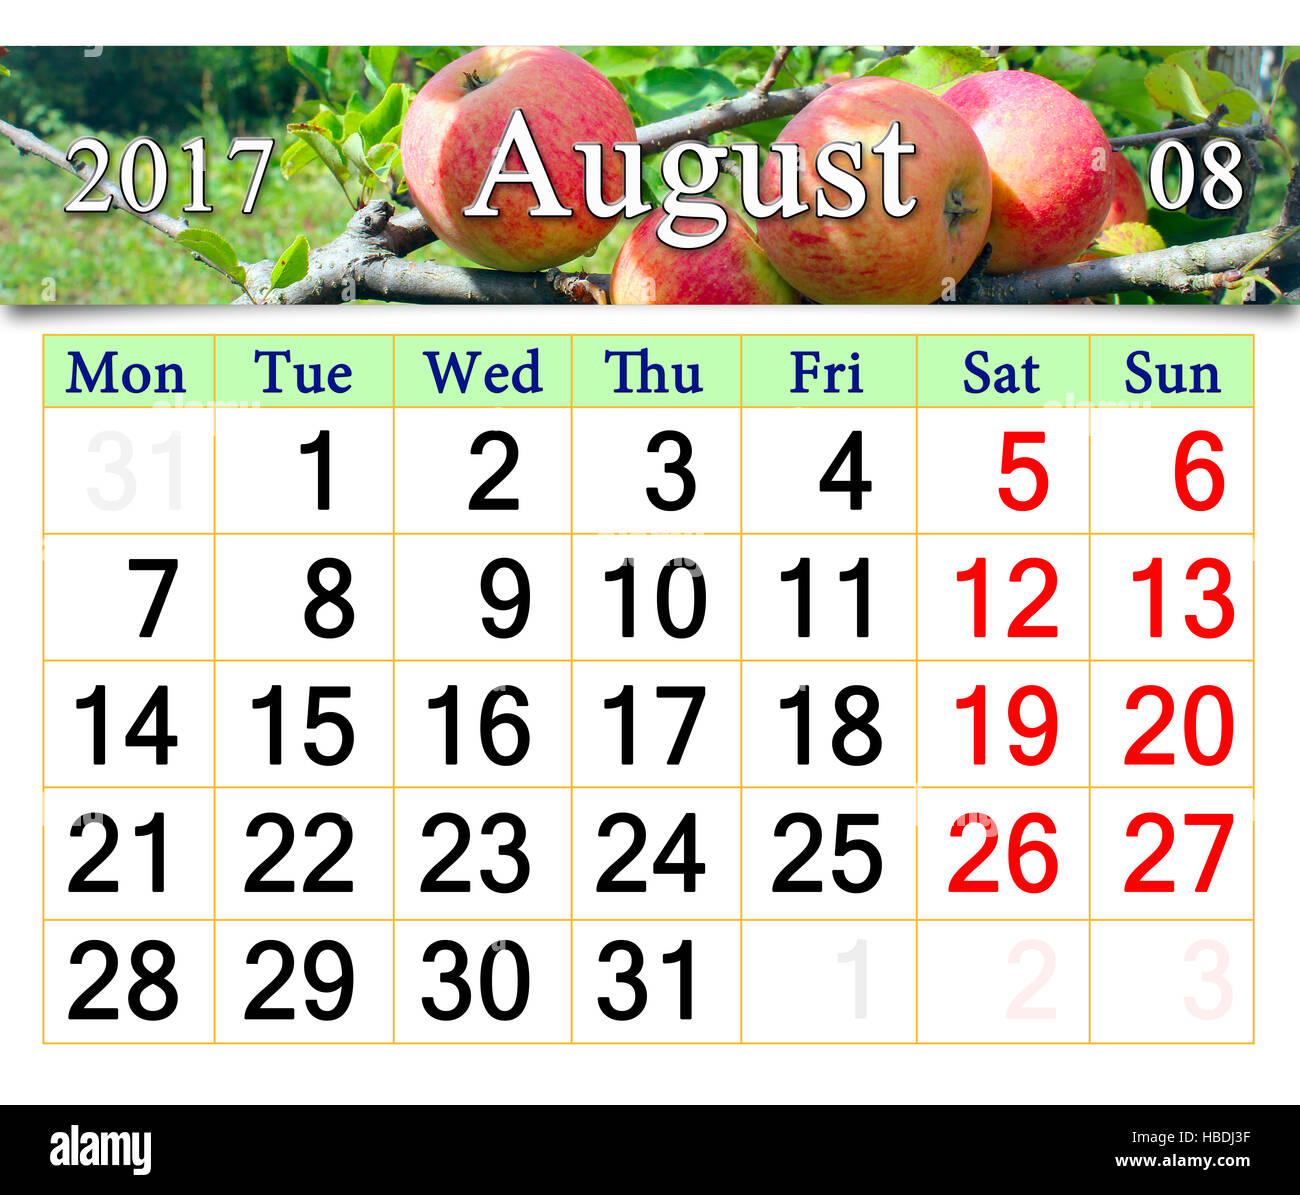 beautiful-calendar-for-august-2017-year-with-ripe-apples-on-the-branch